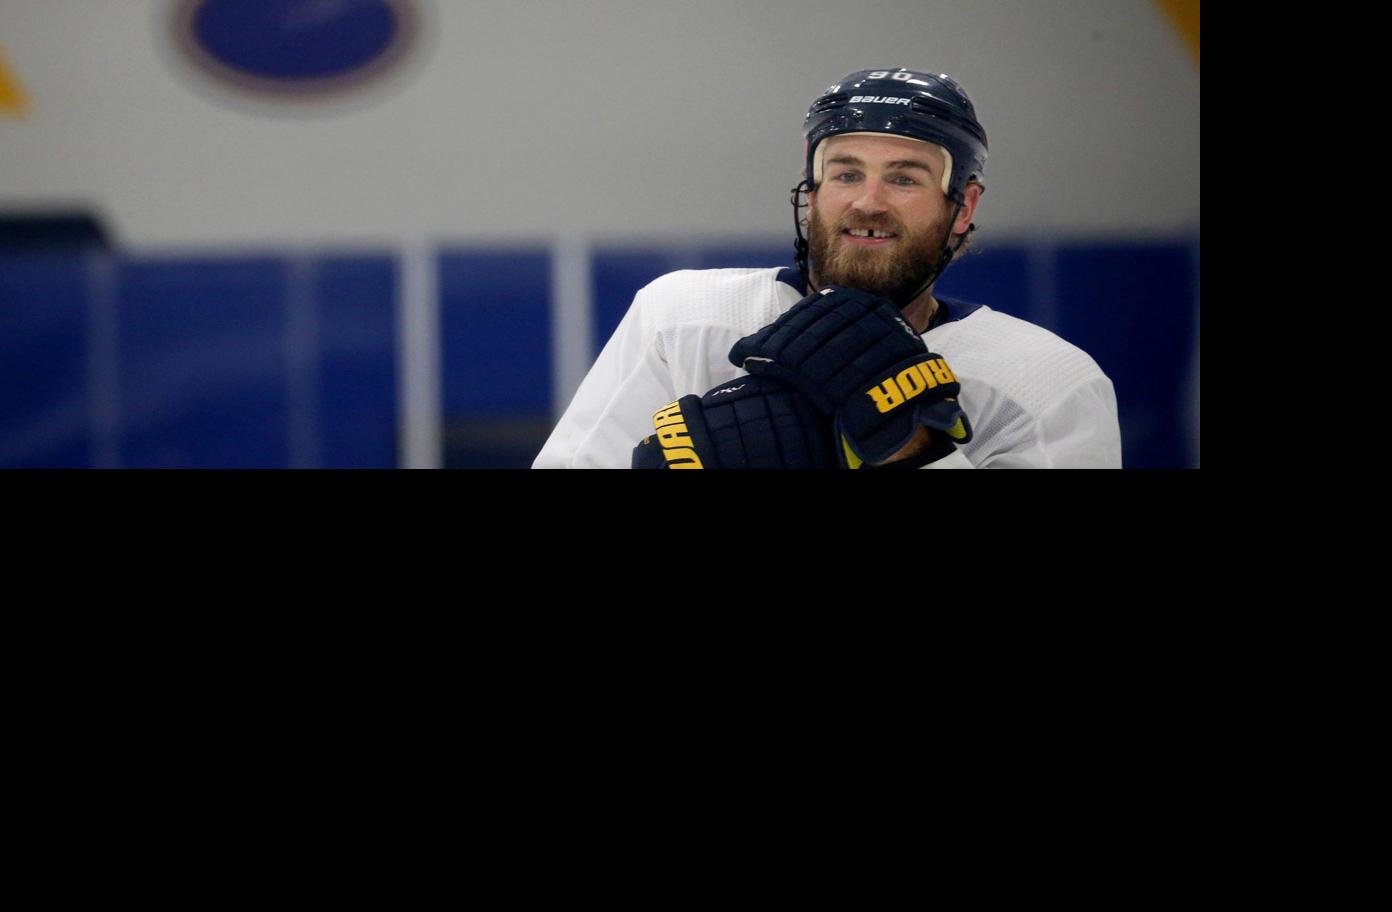 Musician, Family Man, Leader: Get to Know Ryan O'Reilly